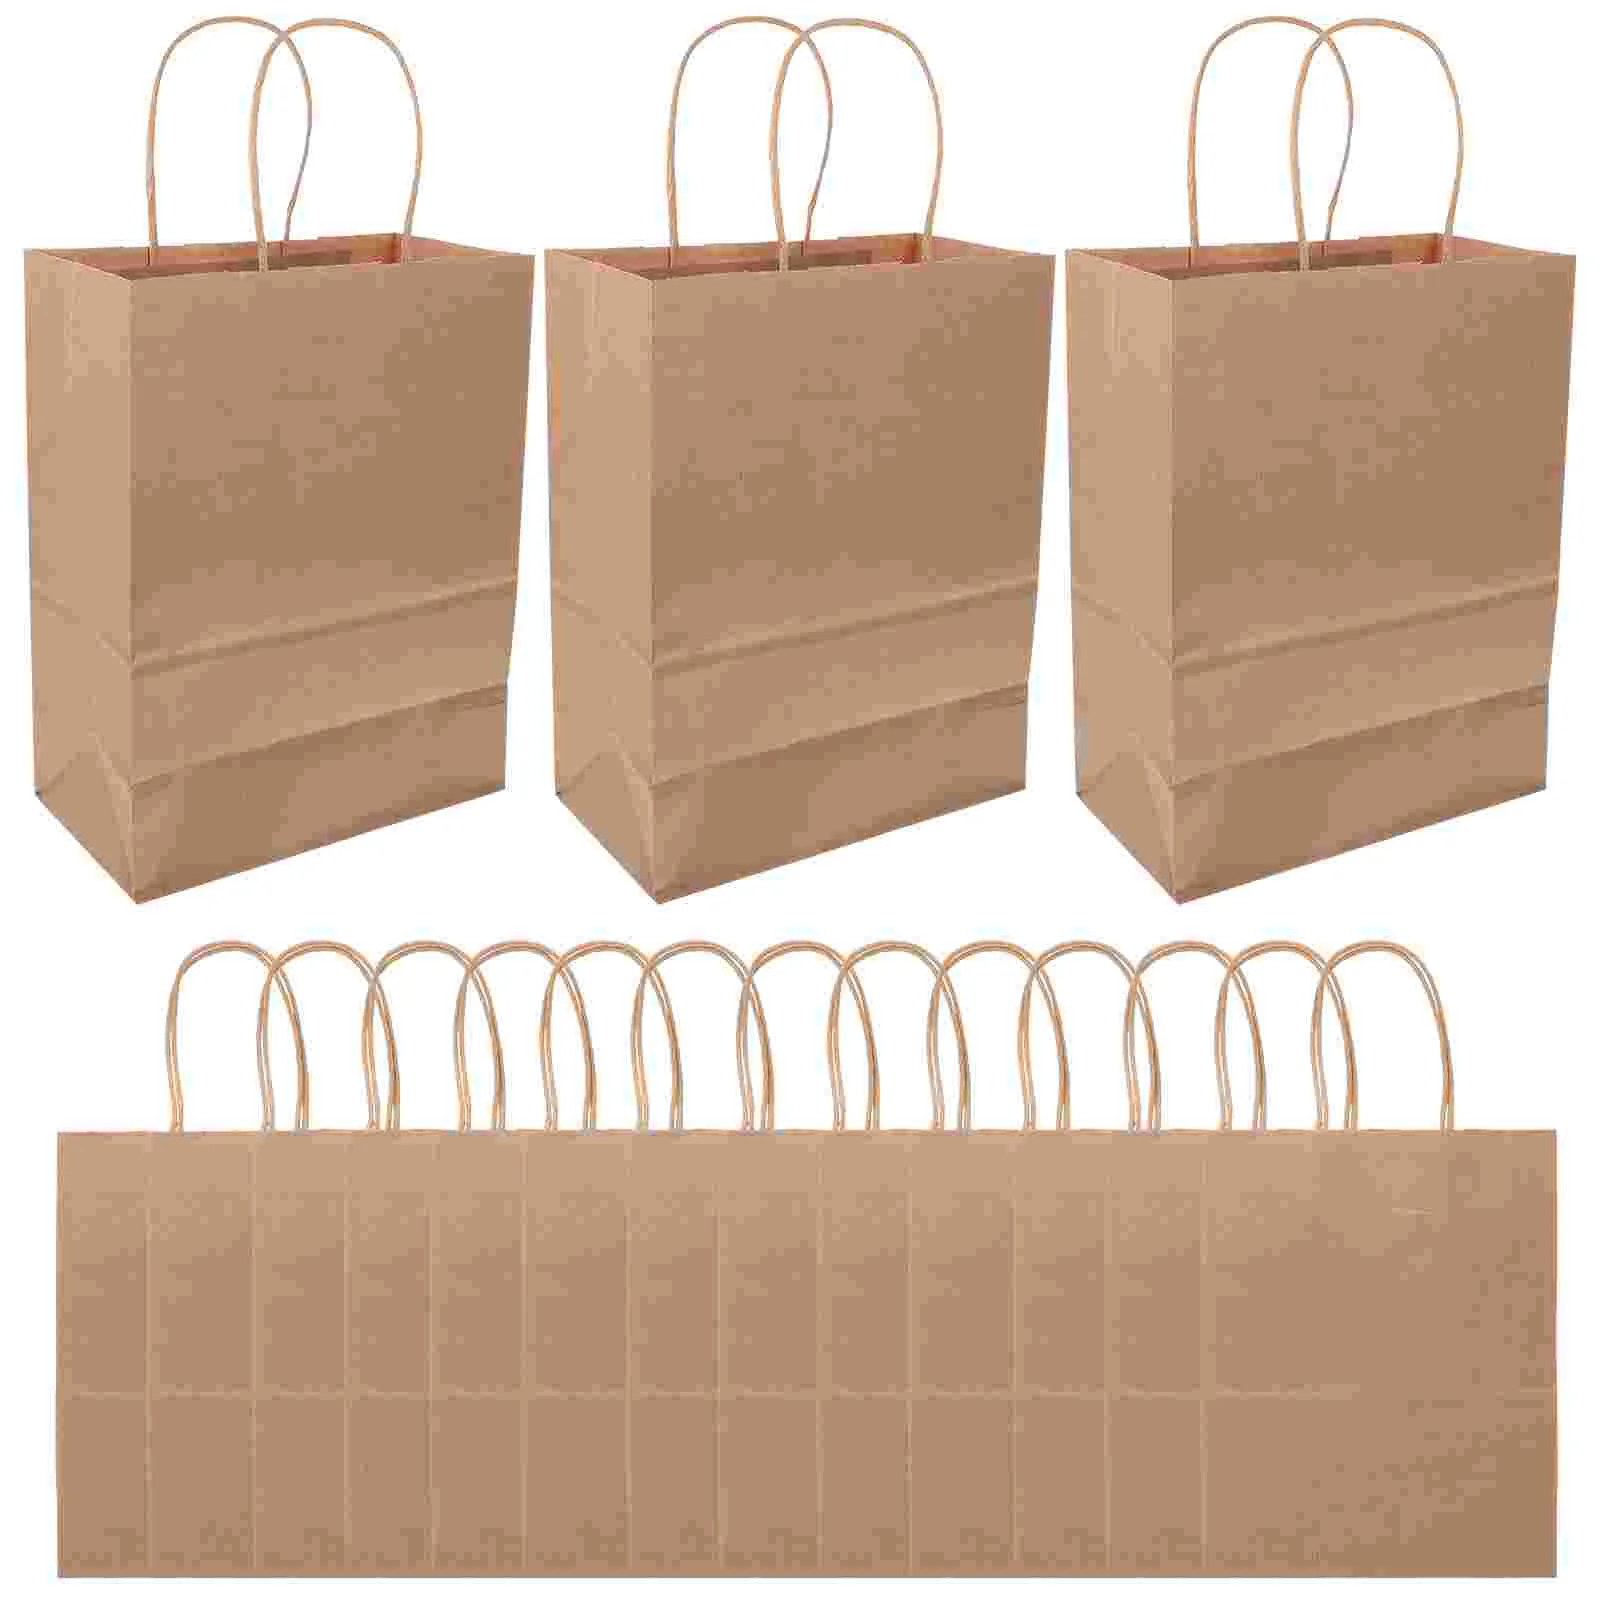 Oceans of Possibilities Recycled Paper Bags (25 per pkg) – Collaborative  Summer Library Program Store